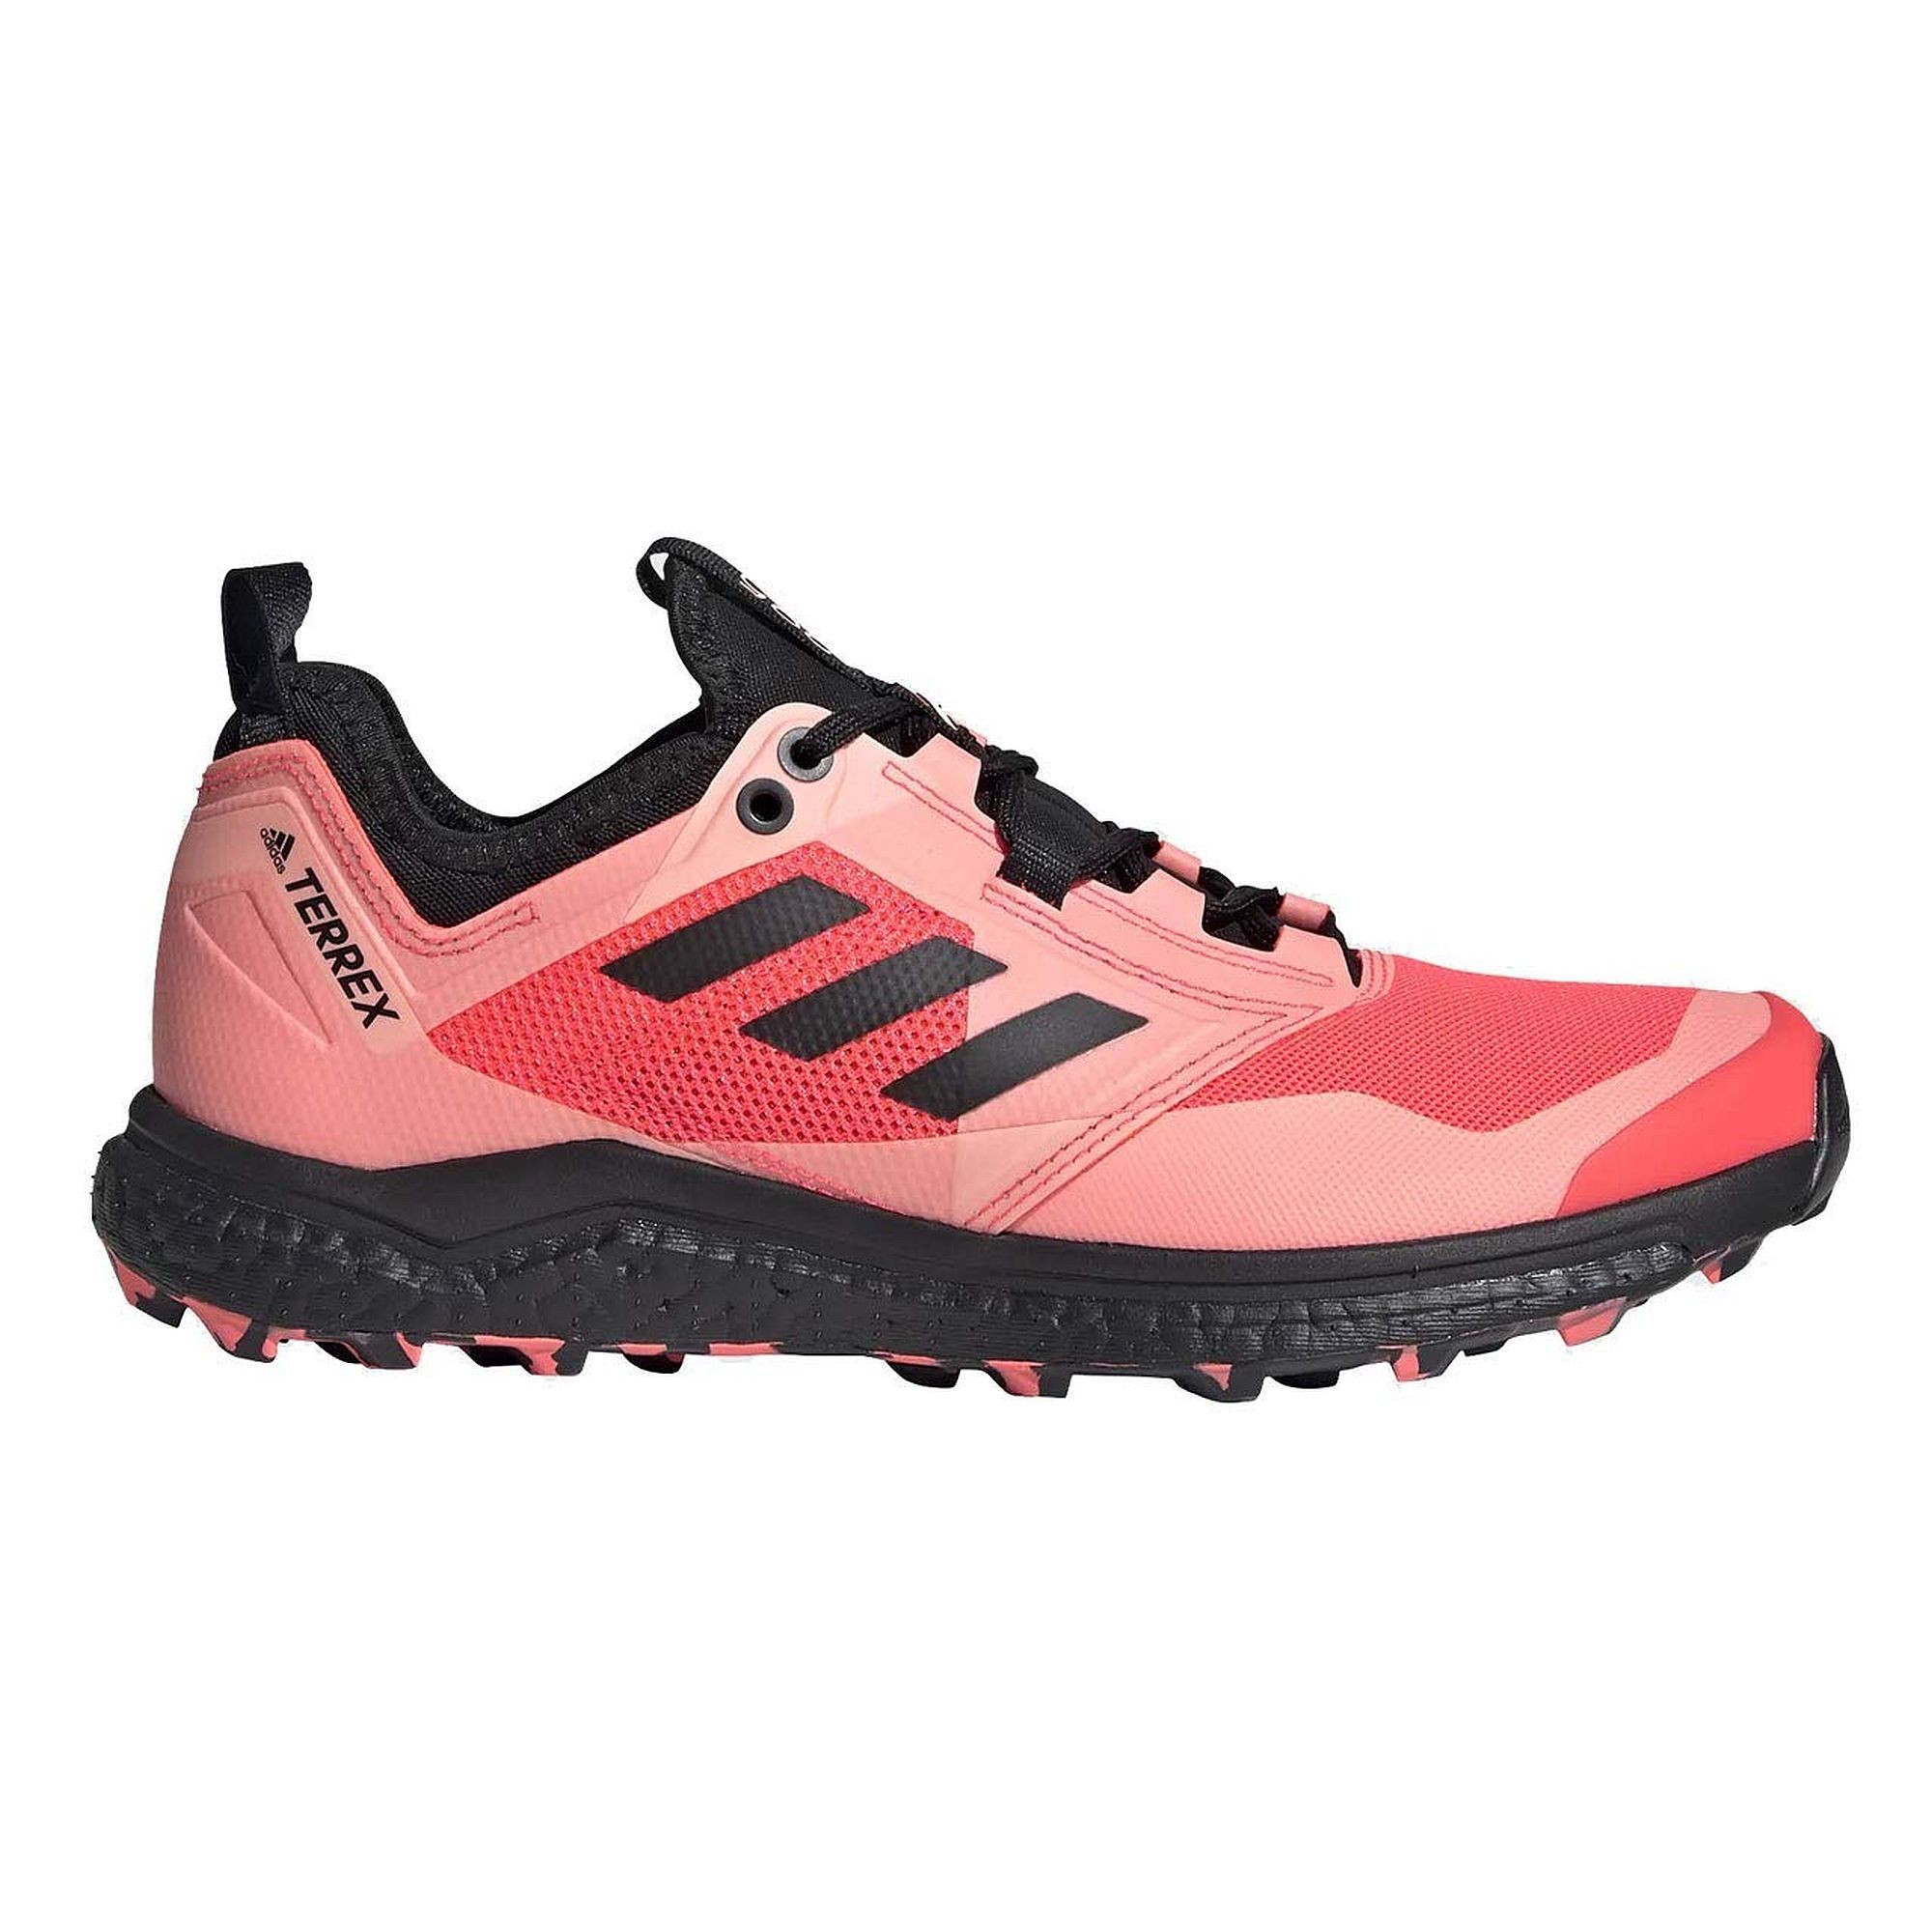 type Objected air adidas Performance - Running Shoes , Terrex Agravic Xt W - Brands Expert